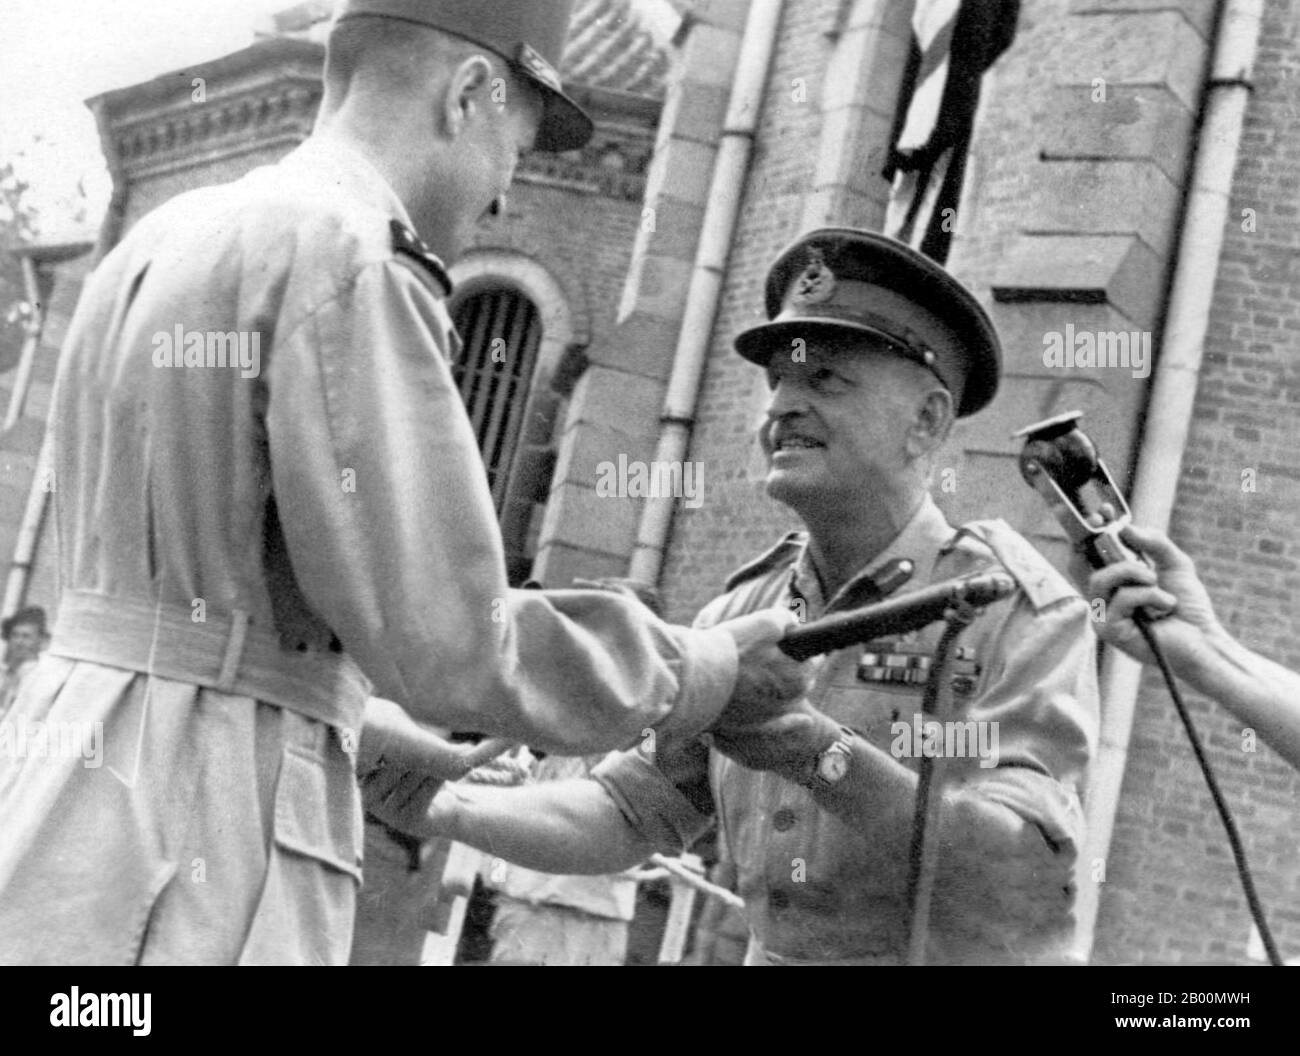 Vietnam: British General Sir Douglas David Gracey (1894–1964) handing over authority to French General Philippe Leclerc outside Saigon Cathedral, 1945.  In September 1945, Gracey led 20,000 troops of the 20th Indian Division to occupy Saigon. During the Potsdam Conference in July 1945, the Allies had agreed on Britain taking control of Vietnam south of the 16th parallel from the Japanese occupiers. The French, anxious to retain their colony, persuaded Gracey's Commander in Chief, Lord Mountbatten, to authorise Gracey to declare martial law. Stock Photo